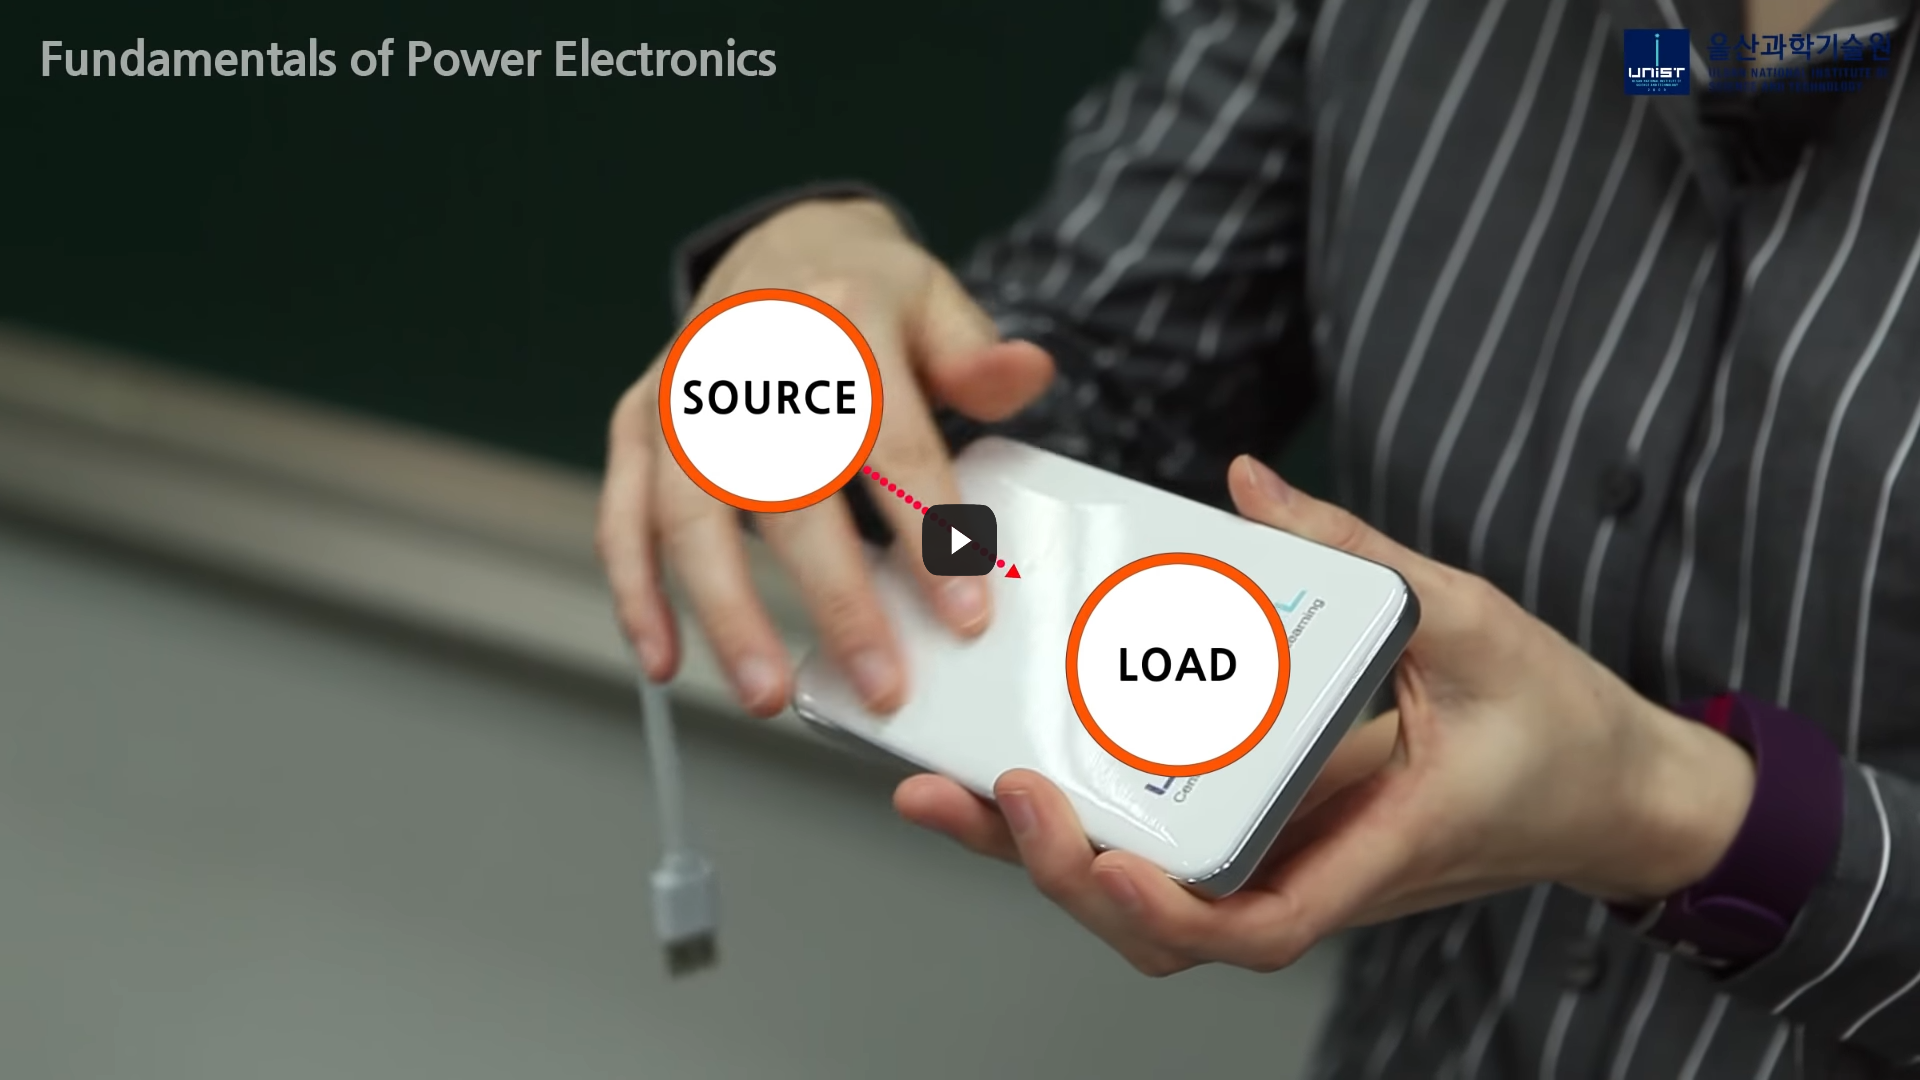 Power Electronics Introduction - What is Power Electronics?